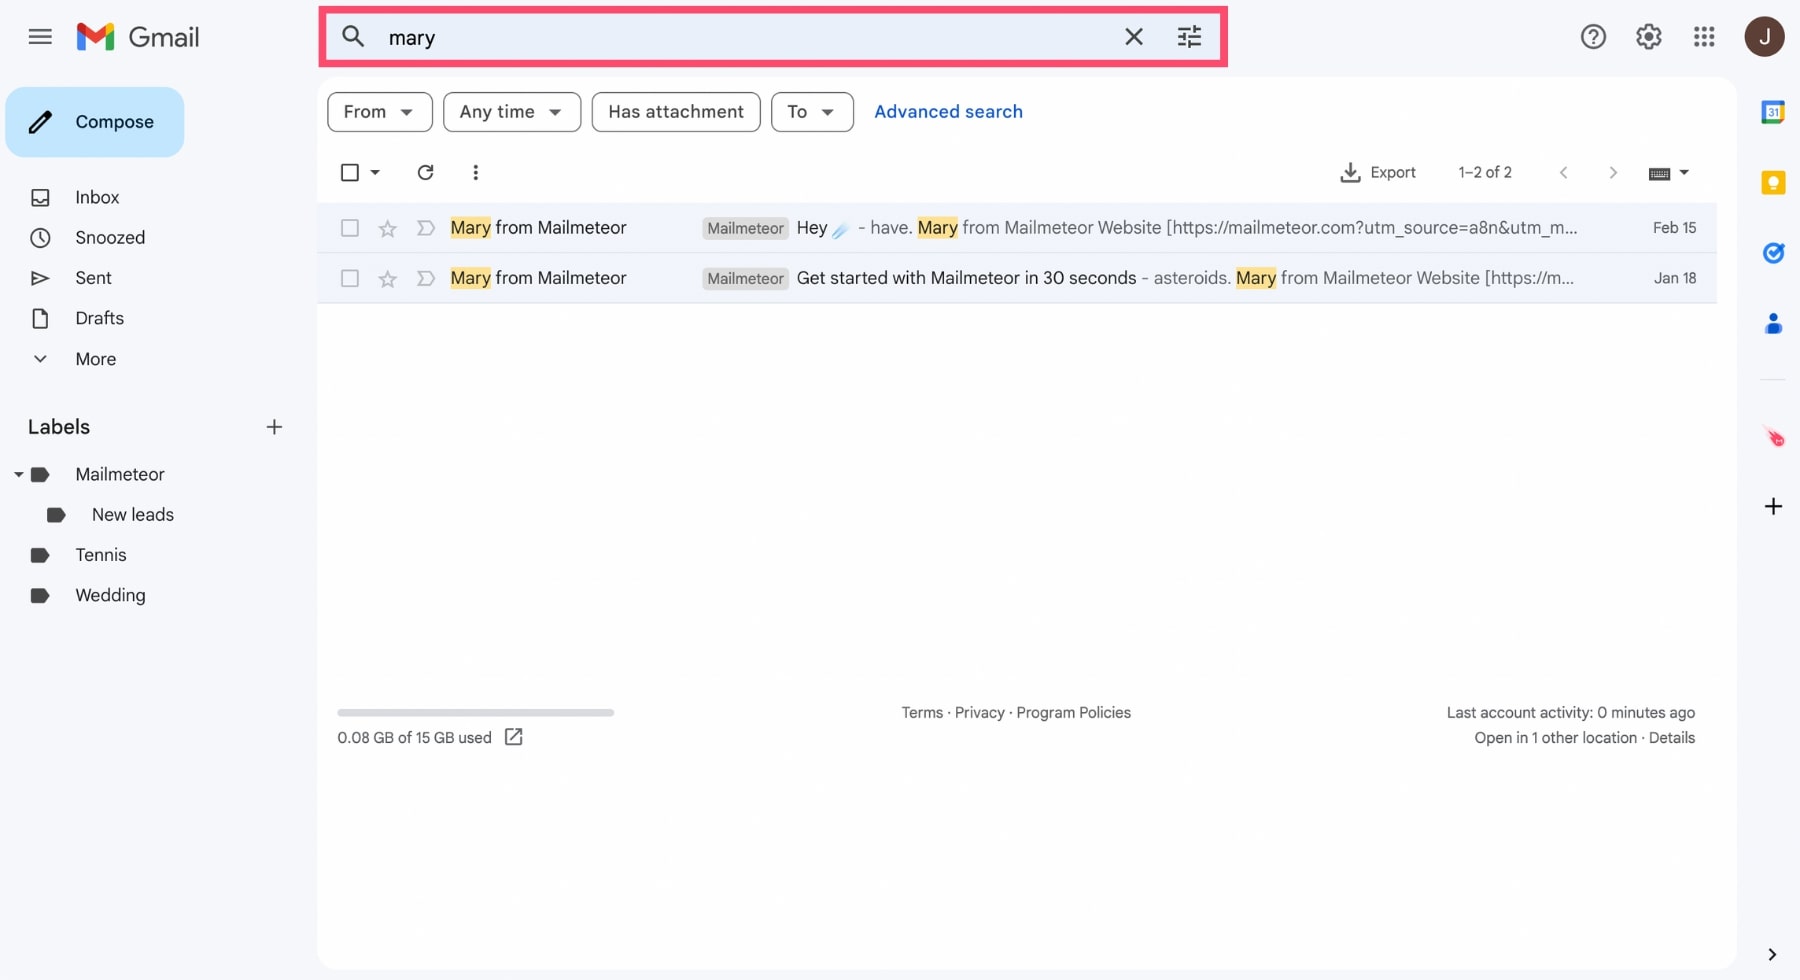 Find a Gmail account in your contact list